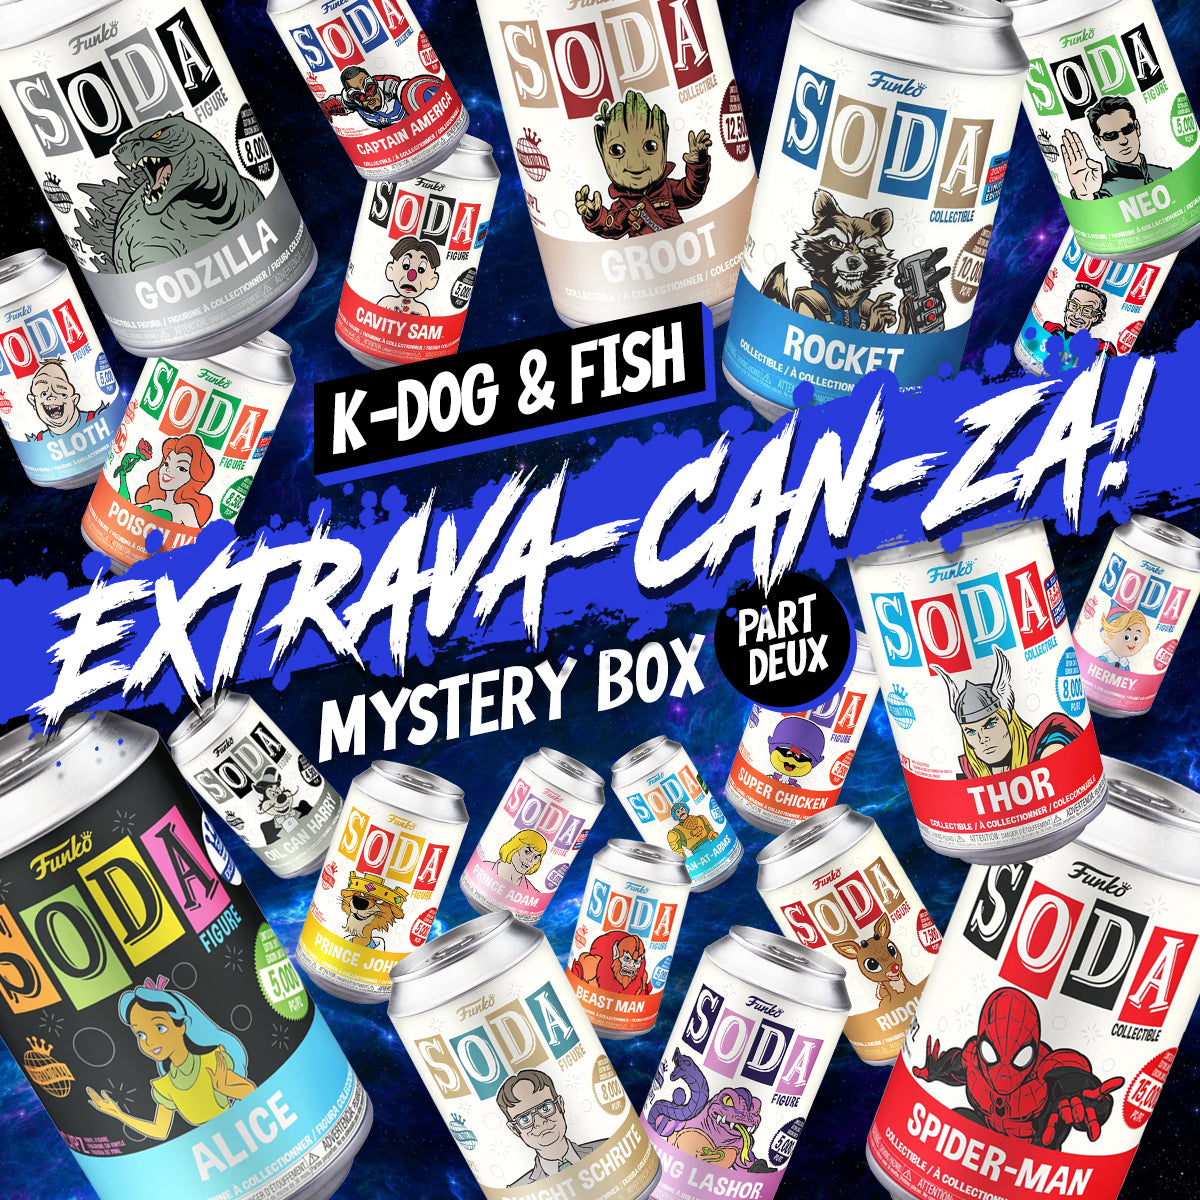 K-DOG & FISH - EXTRAVA-CAN-ZA - MYSTERY BOX: PART DEUX (SOLD OUT)